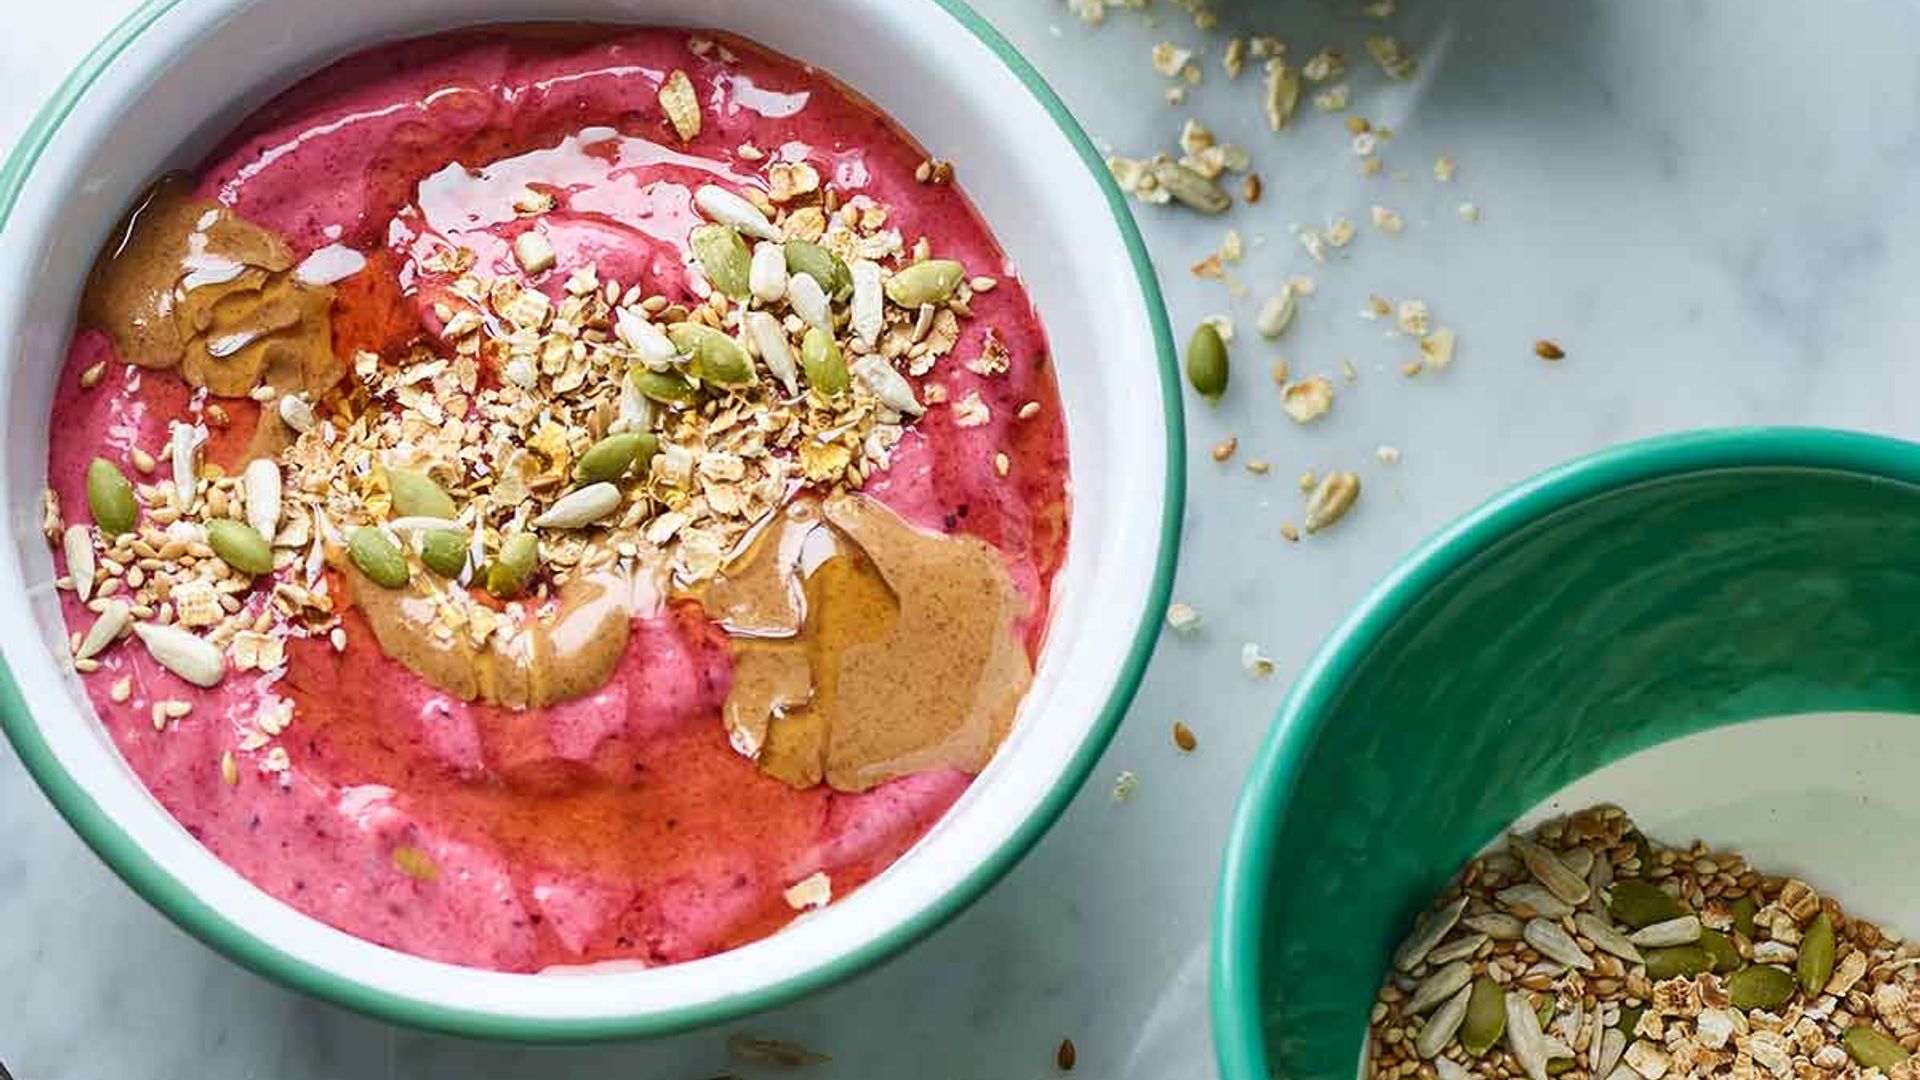 Jumping on the acai bowl craze? Joe Wicks' avo and berry breakfast-pot recipe is a simple take on the viral sensation